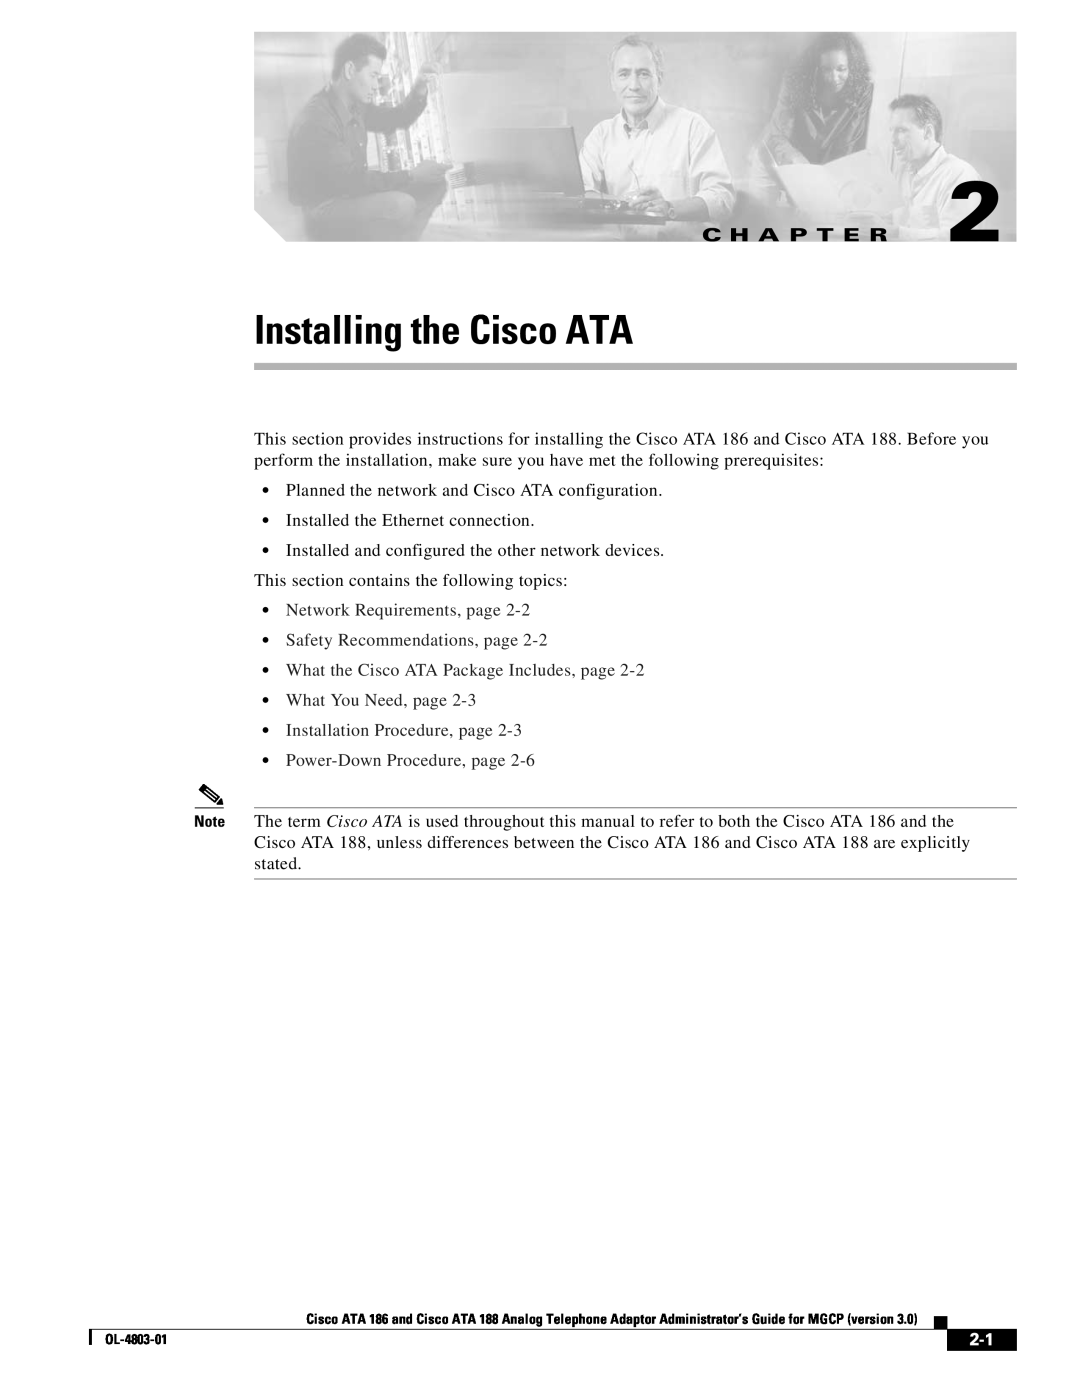 Cisco Systems ATA 188 Installing the Cisco ATA, Network Requirements, page Safety Recommendations, page, C H A P T E R 